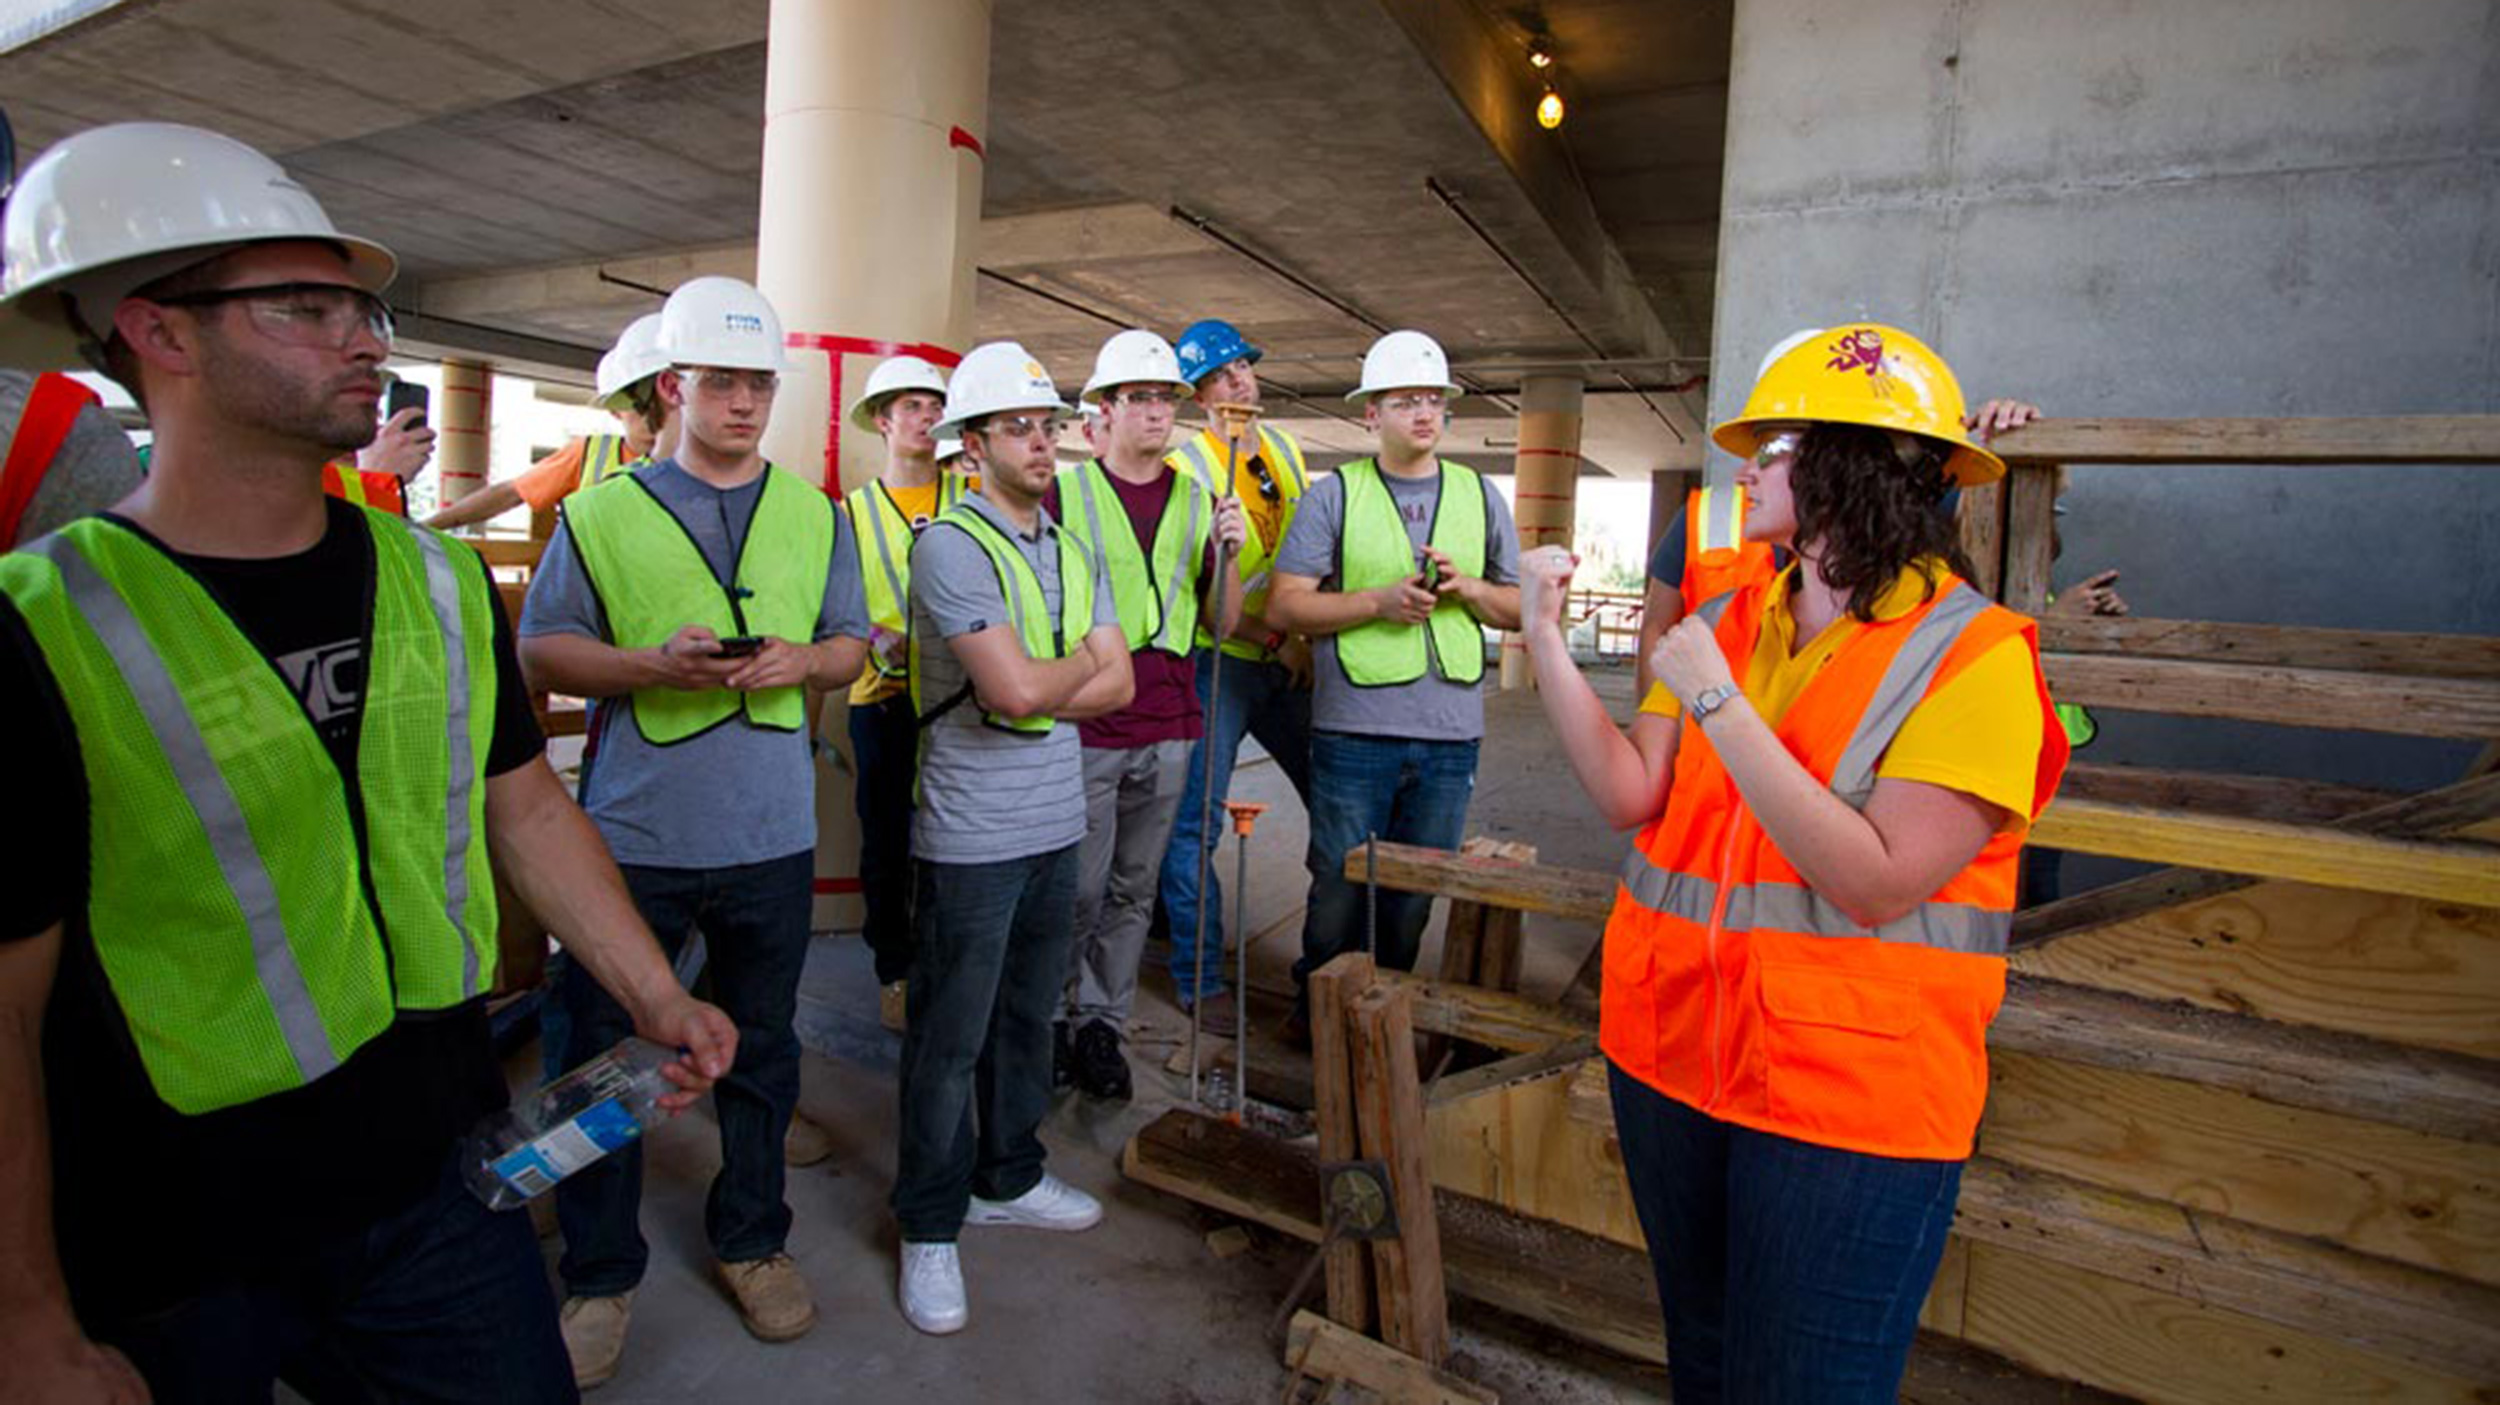 Kristen Parrish, graduate program chair for construction management, leads a group of students at the CAVC construction site